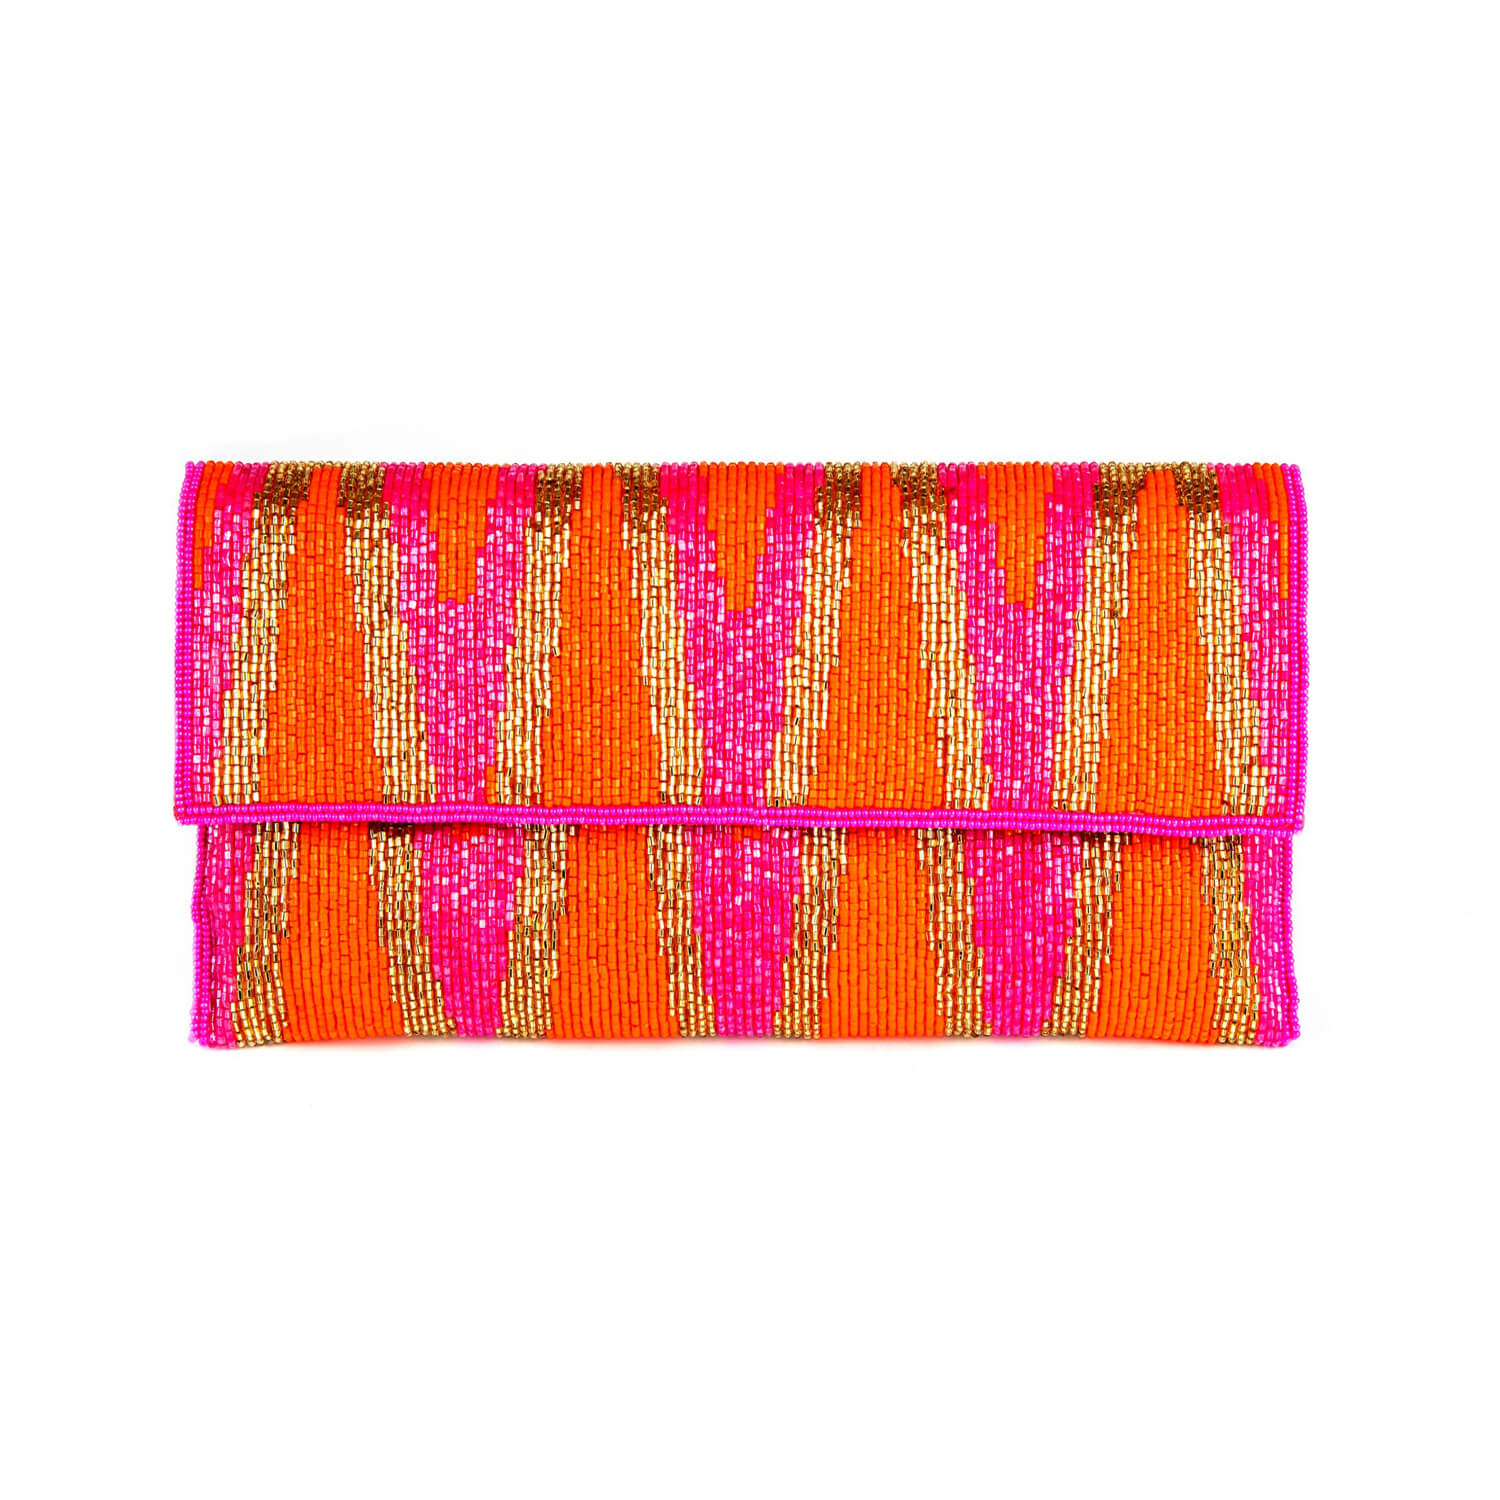 Ikat Hot Pink | Samser Designs - Hand-crafted Handbags, Jewelry and ...